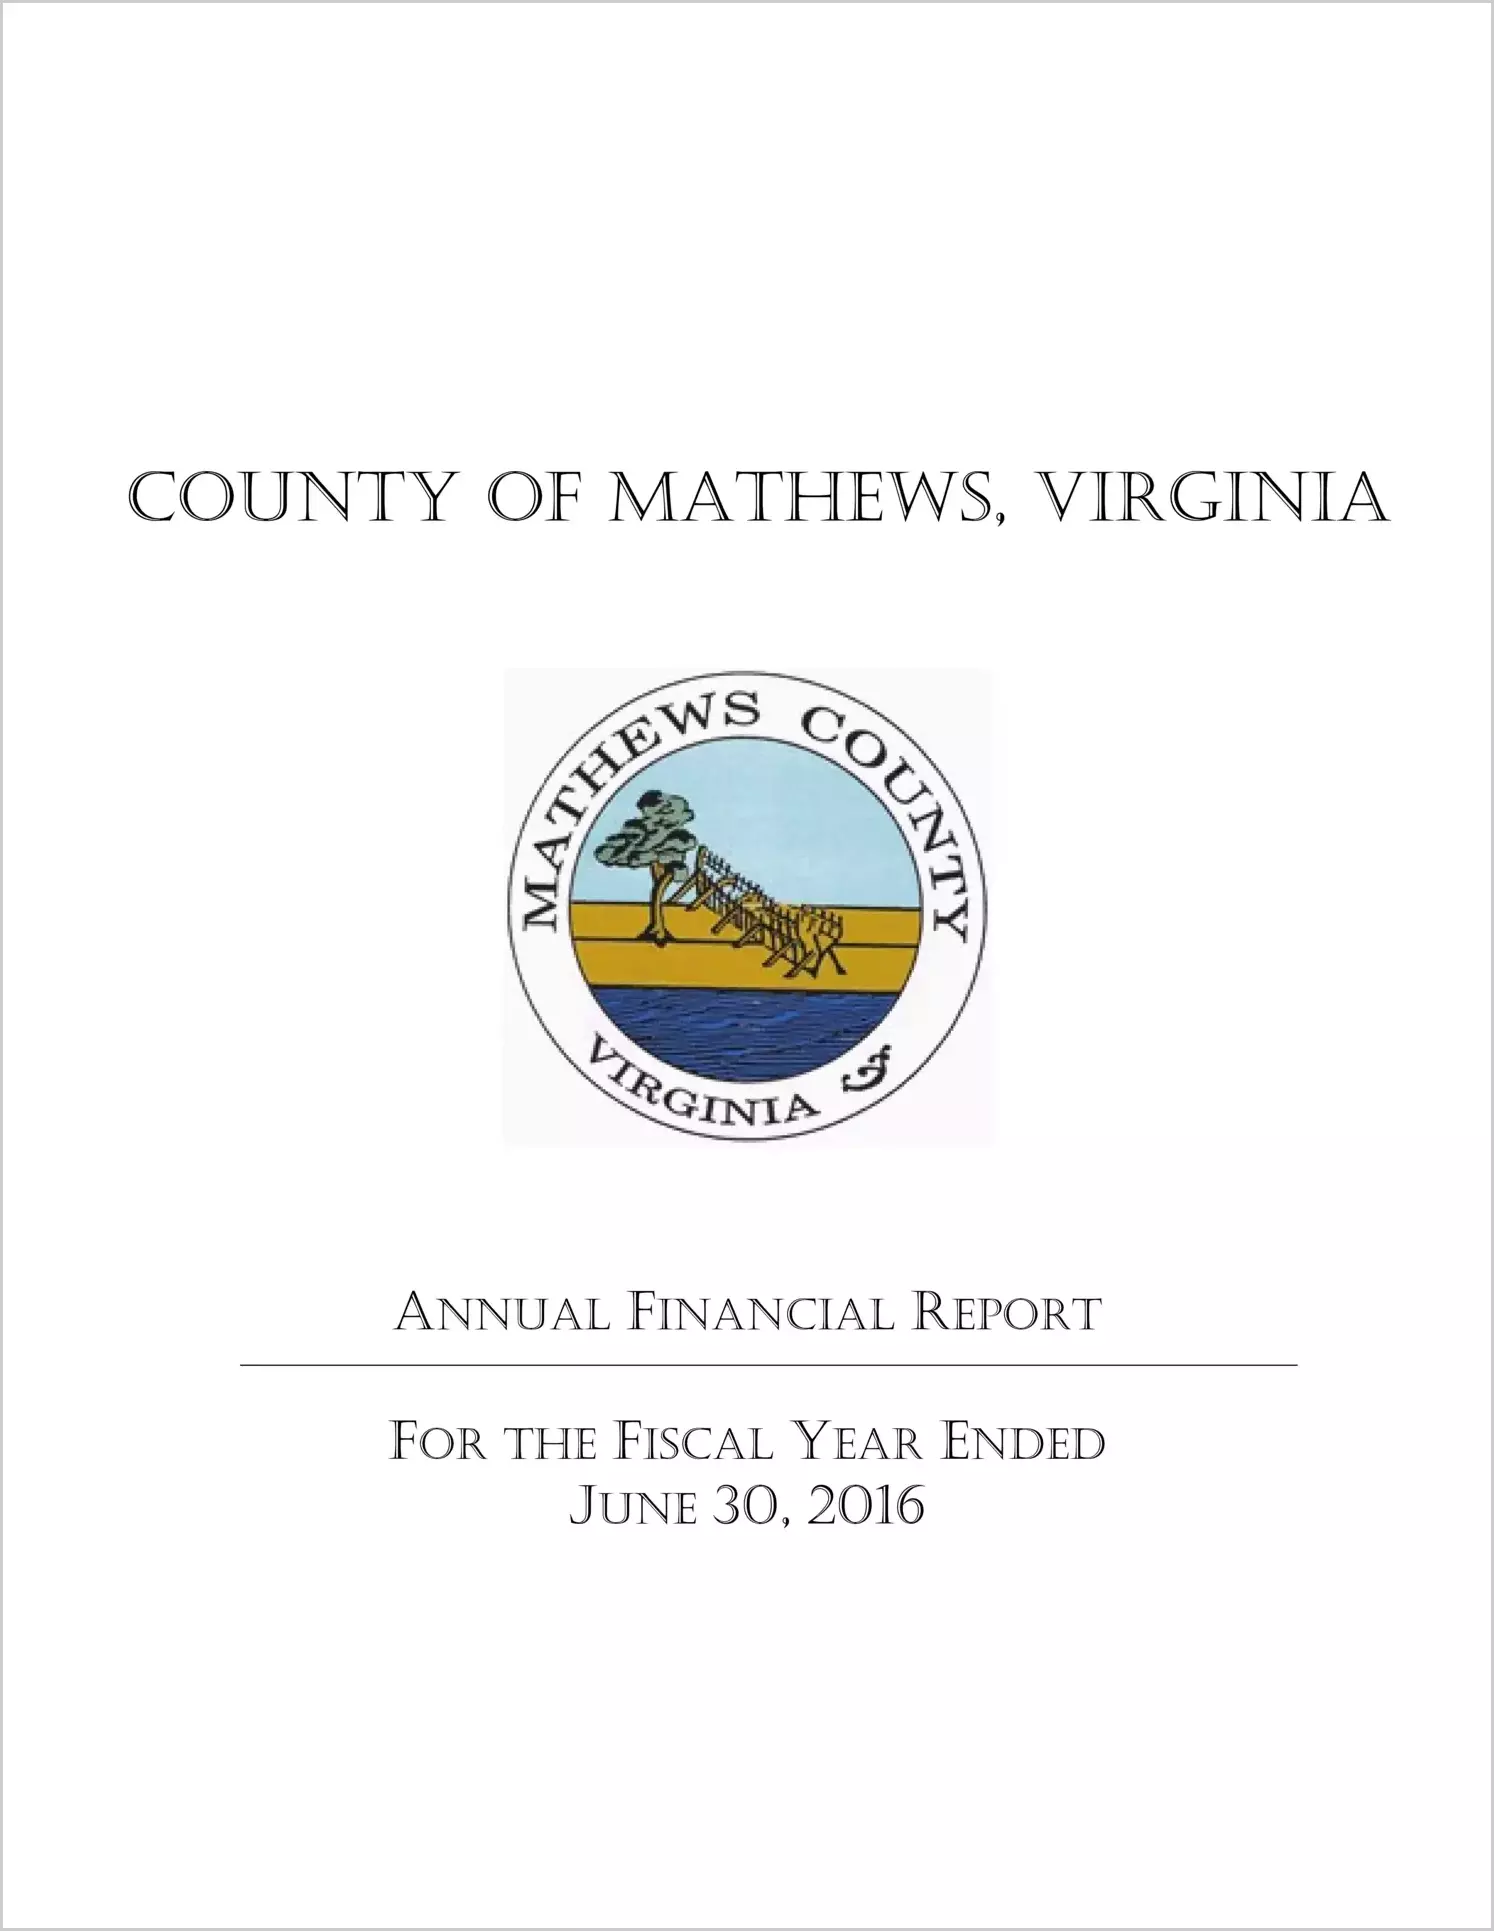 2016 Annual Financial Report for County of Mathews